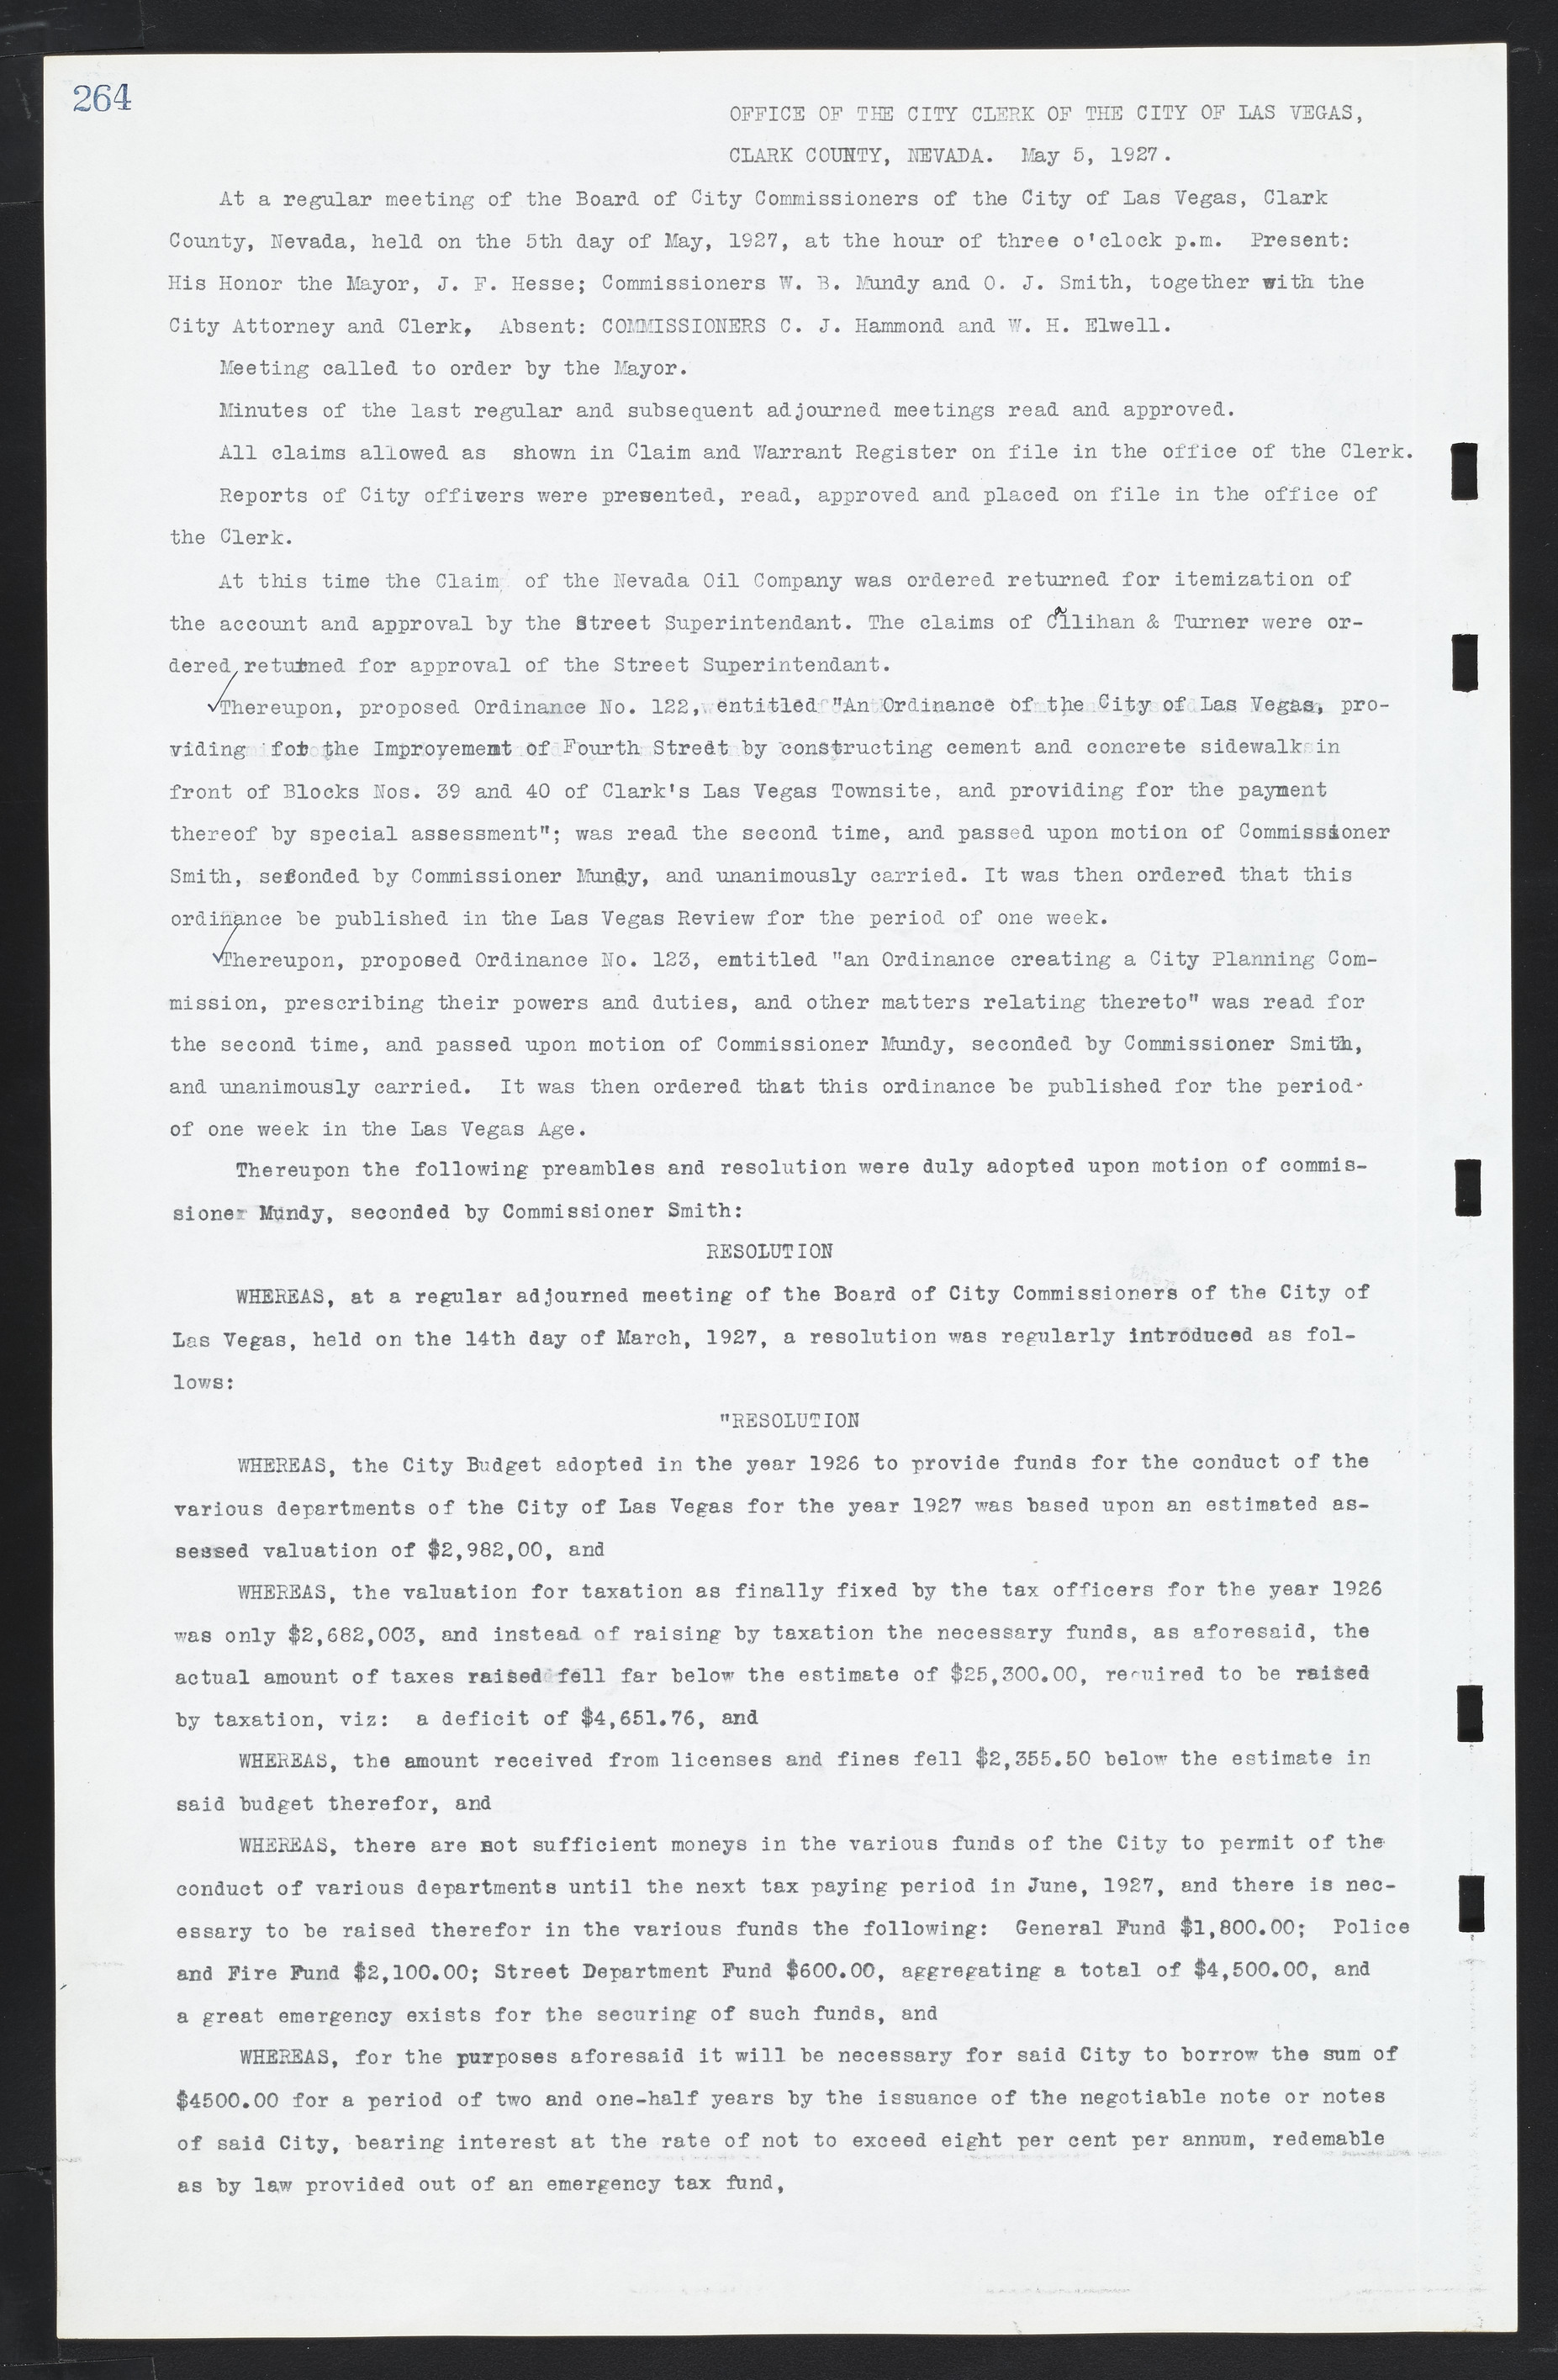 Las Vegas City Commission Minutes, March 1, 1922 to May 10, 1929, lvc000002-273